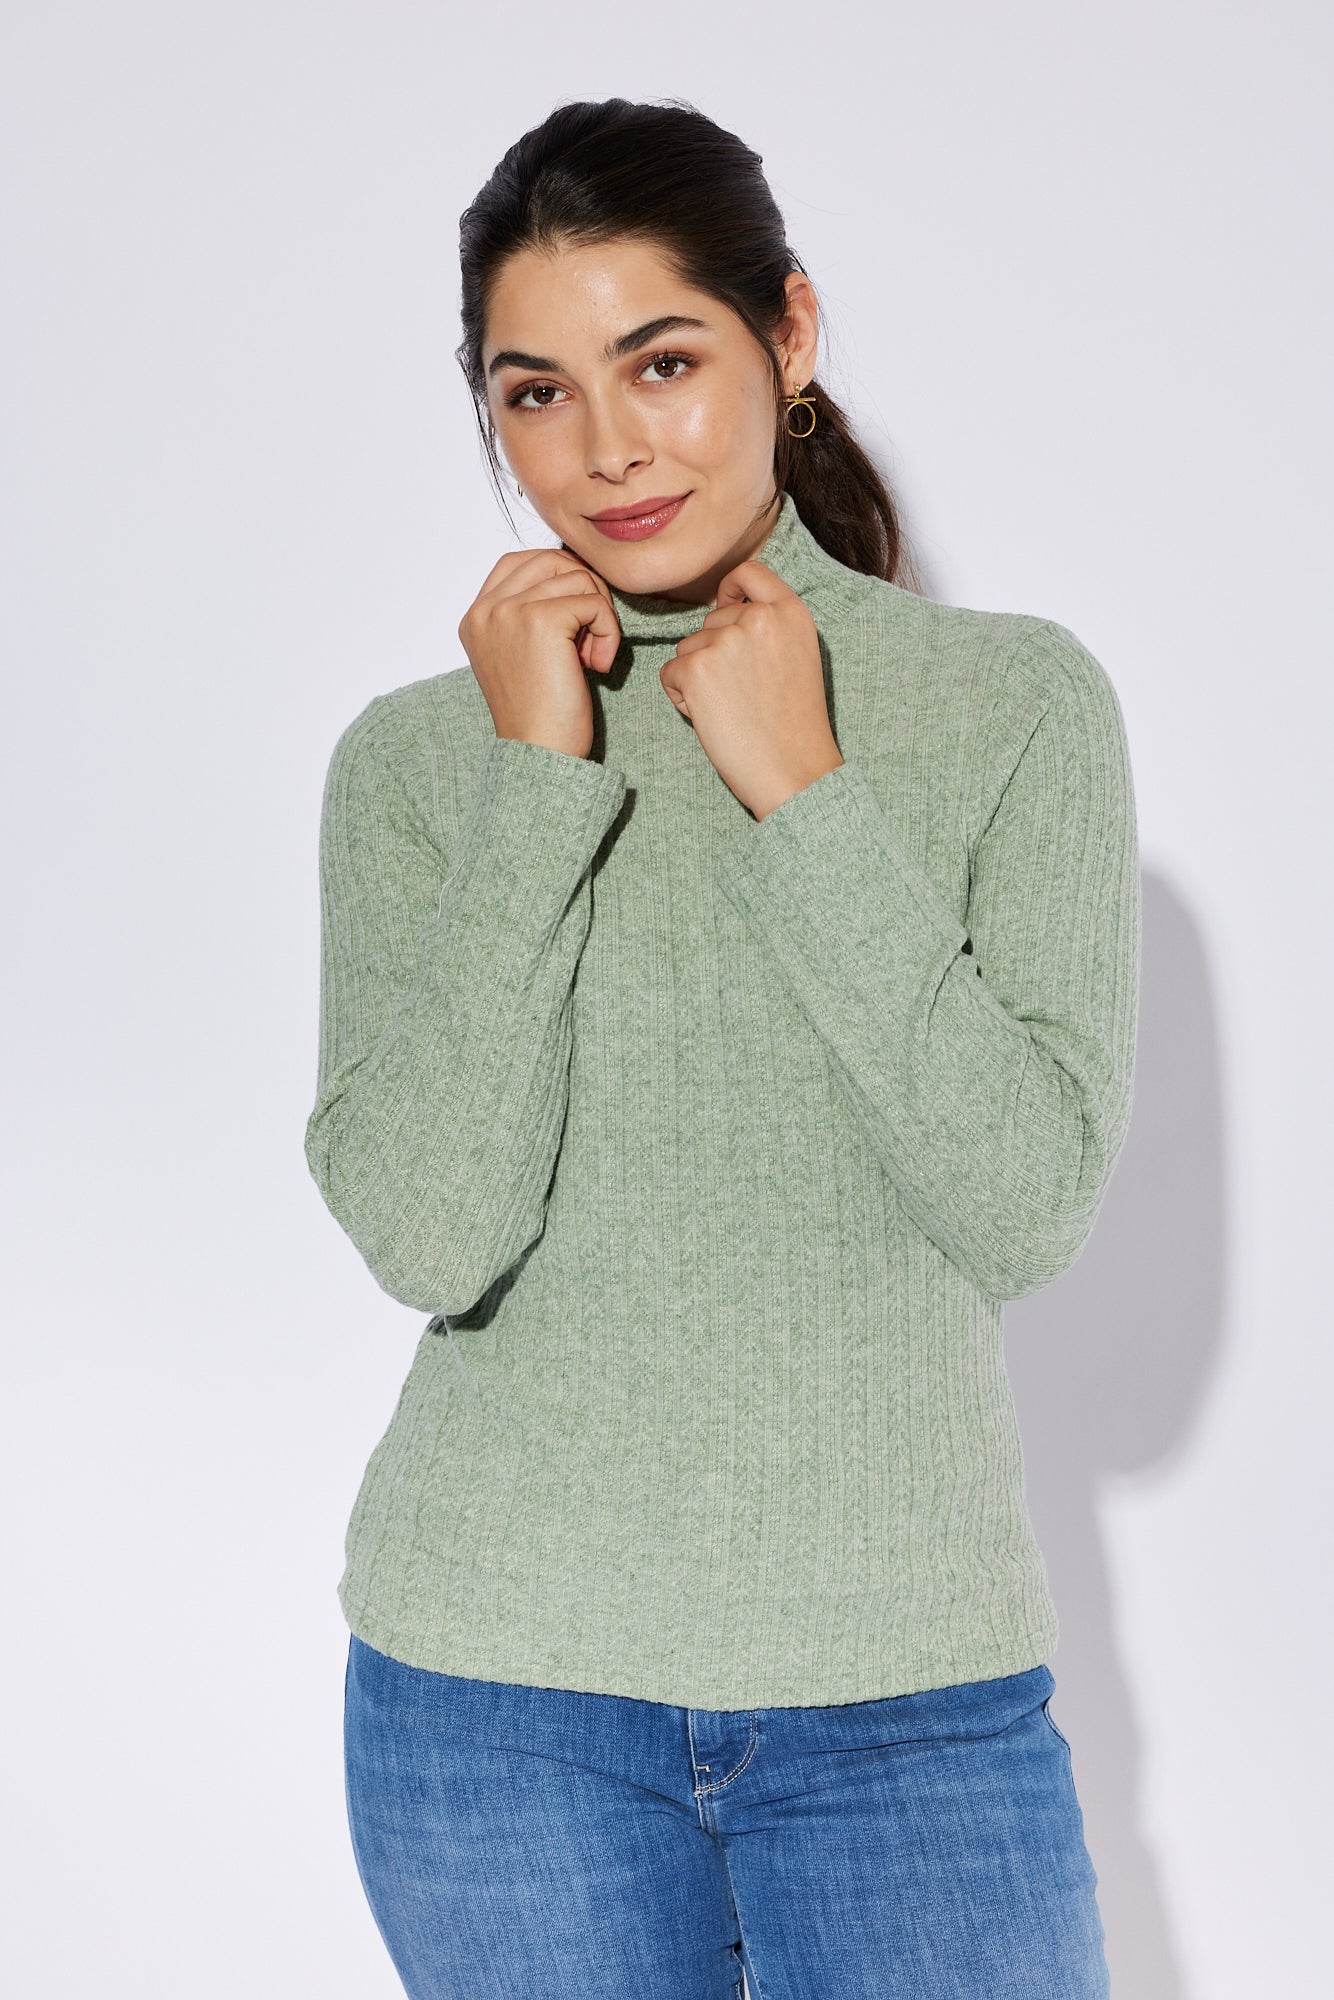 Coco Sweater / Sage Knit